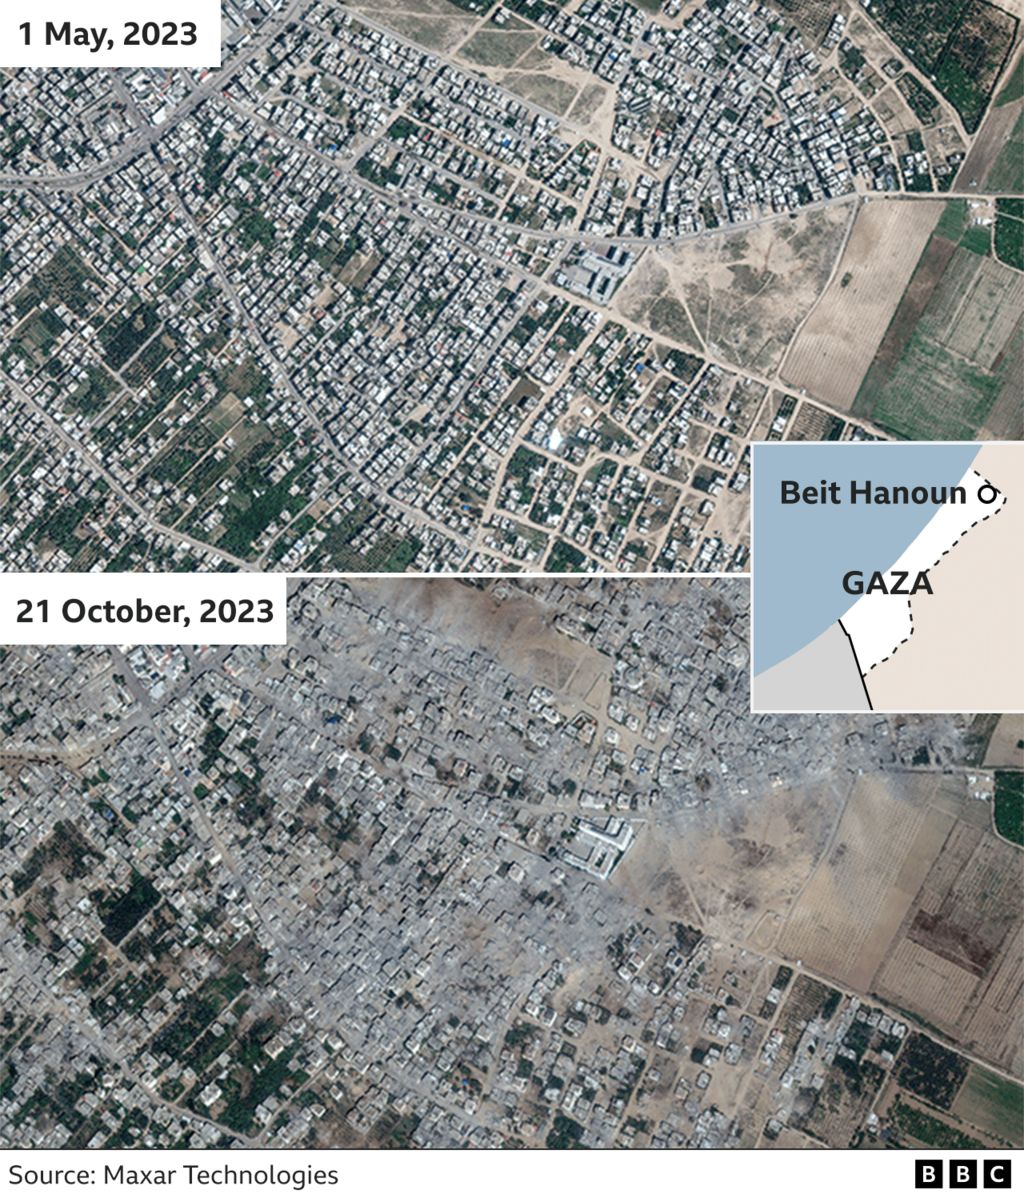 Satellite images of Beit Hanoun in Gaza, showing the area before and after Israeli aerial attacks that destroyed several buildings